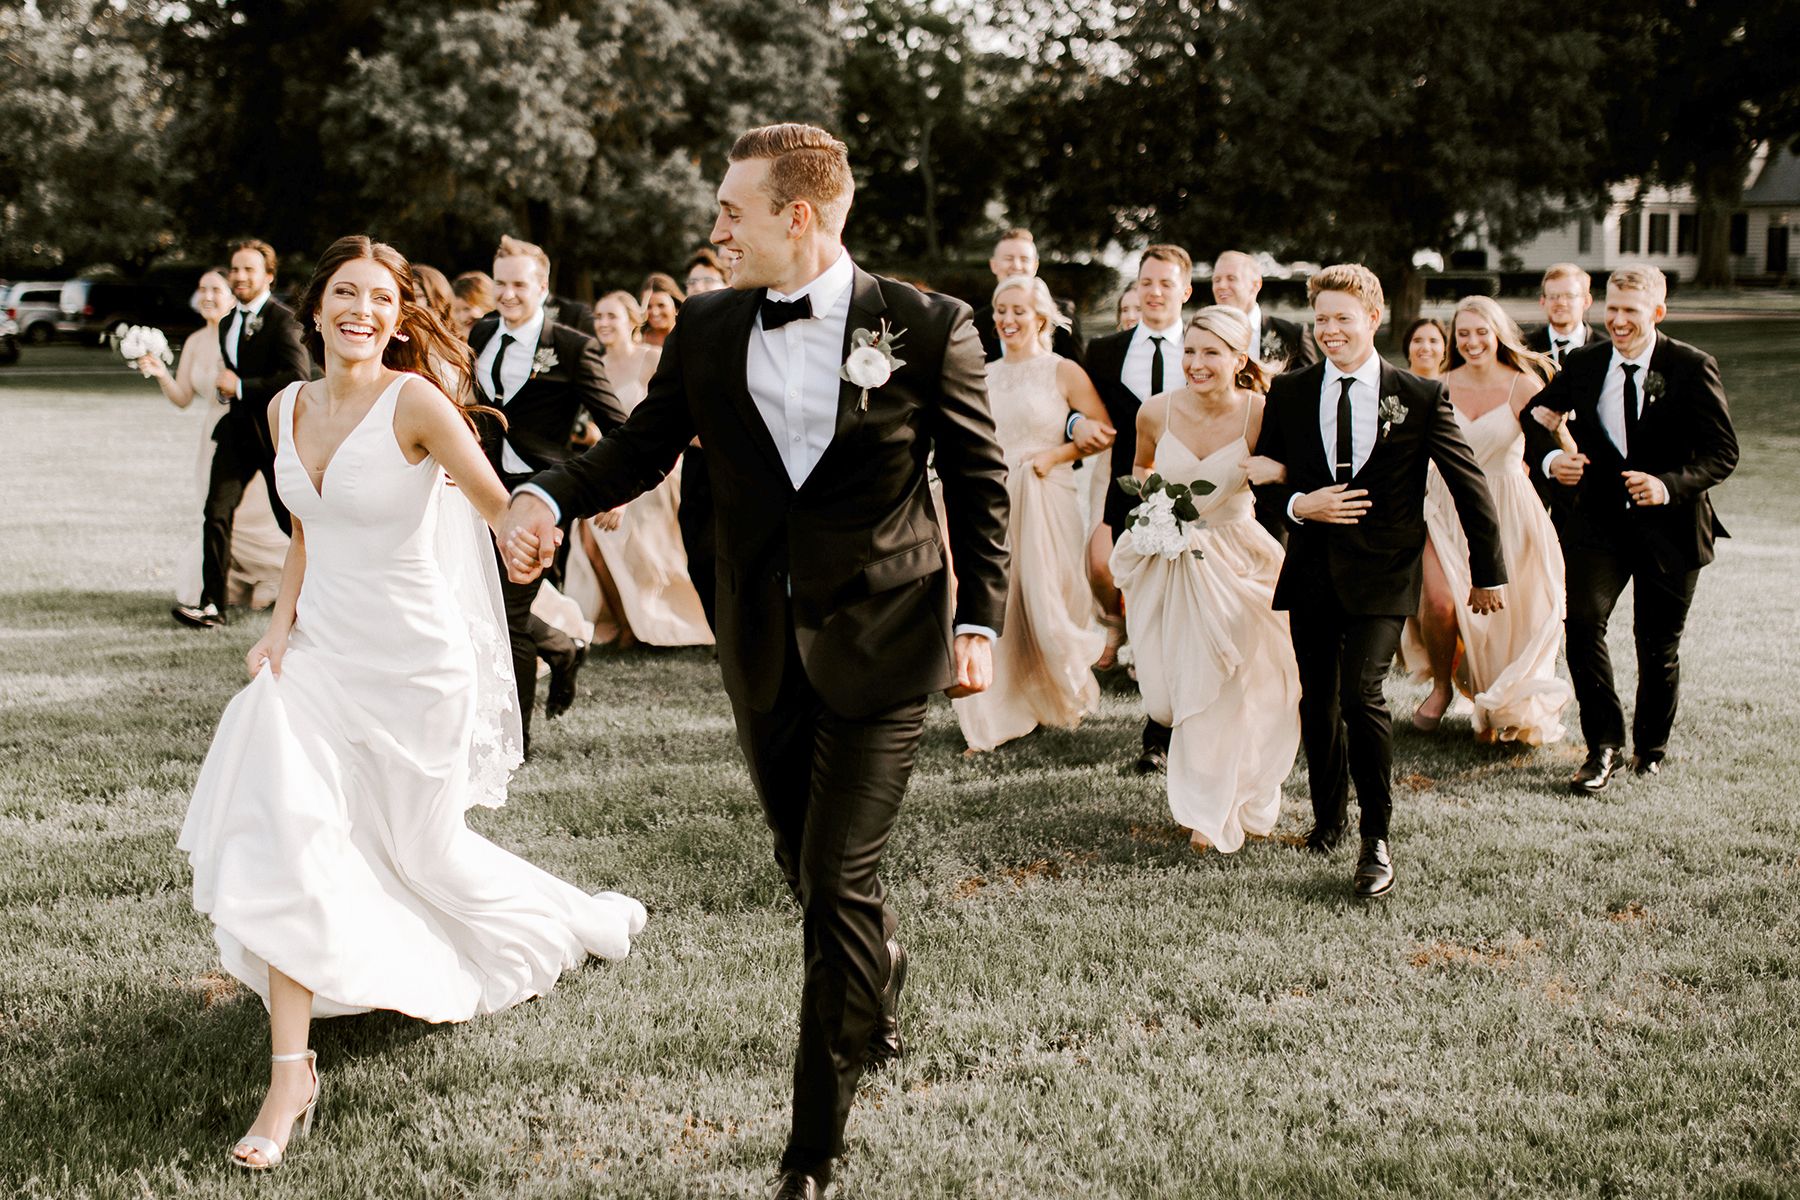 photo of groom in a black tuxedo holding bride’s hand while running outside with wedding party behind